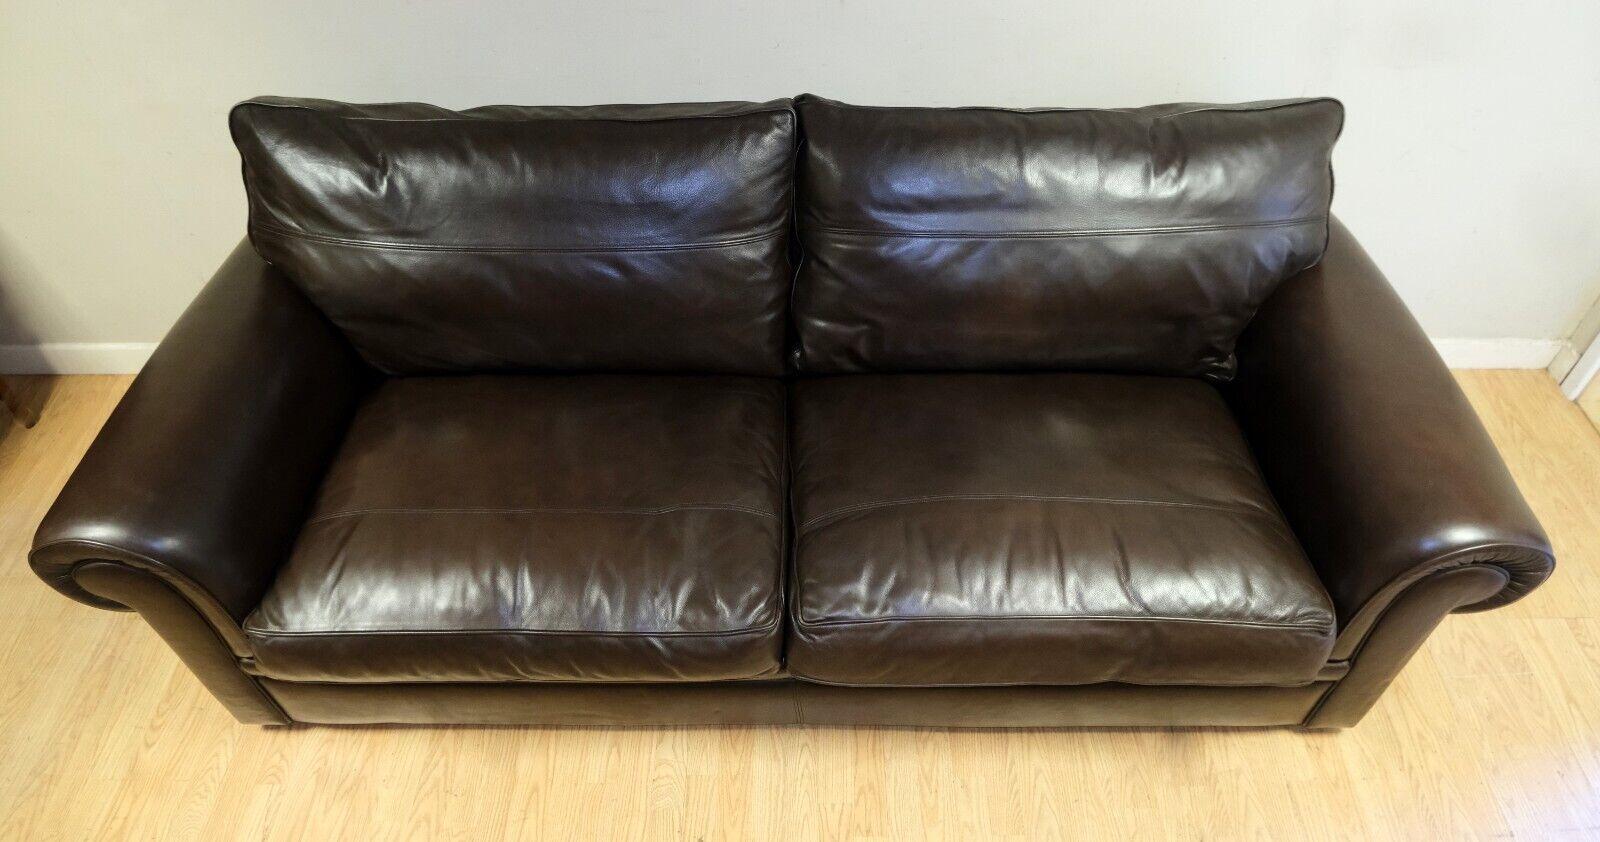 Mid-Century Modern STUNNiNG DURESTA GARRICK THREE SEATER BROWN LEATHER SOFA ON CLASSIC SCROLL ARMS For Sale